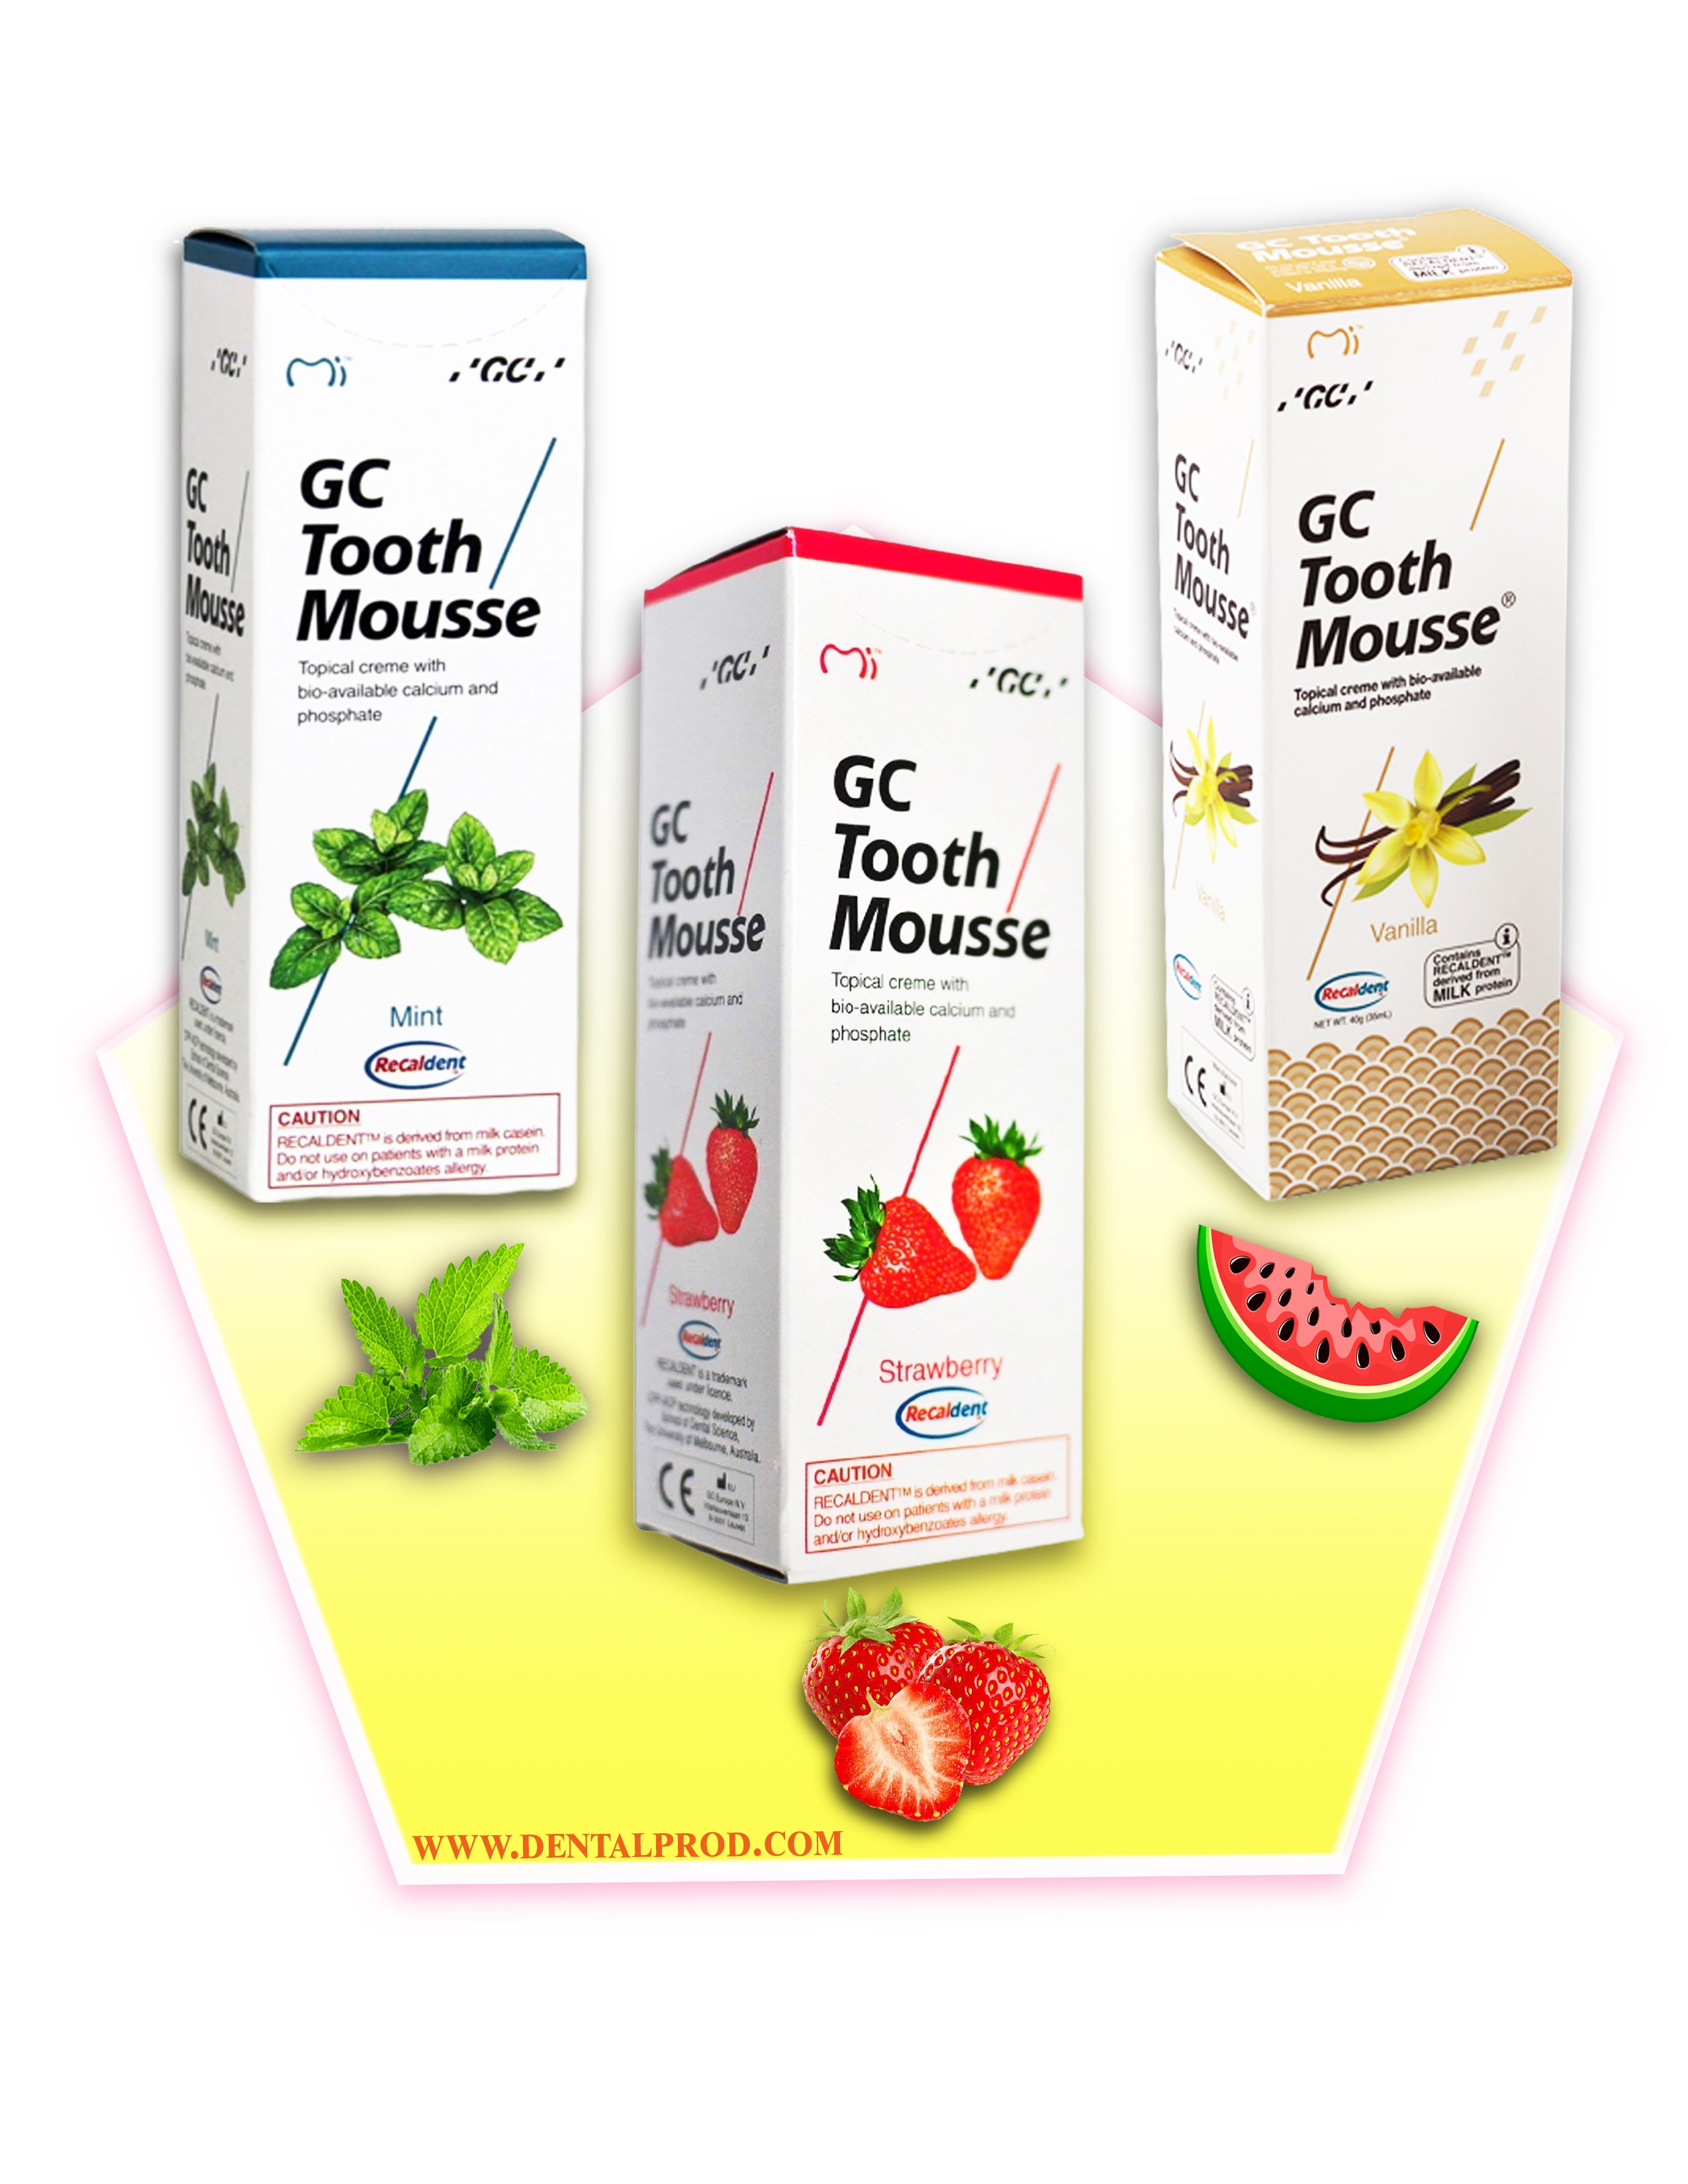 GC Tooth Mousse Mint Flavor 40g Topical Tooth Cream with Recaldent